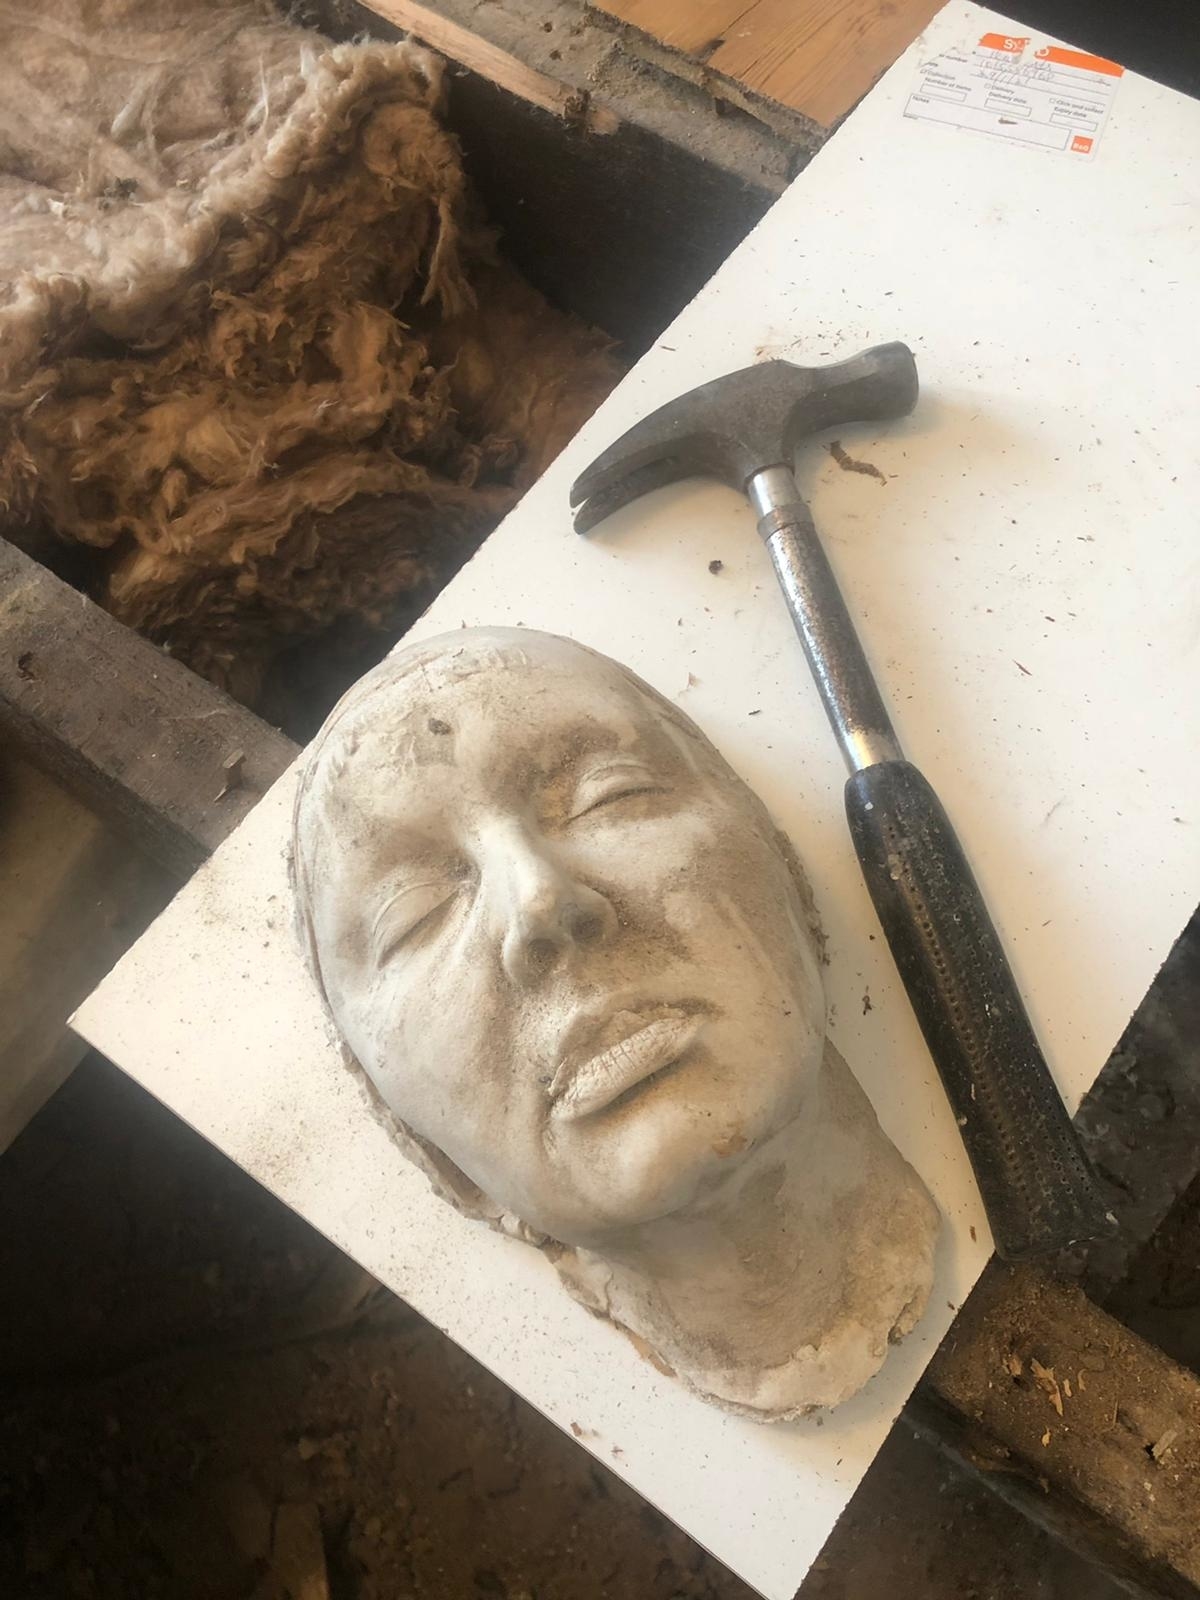 Possible death mask or alignate mold made of someone&#x27;s face